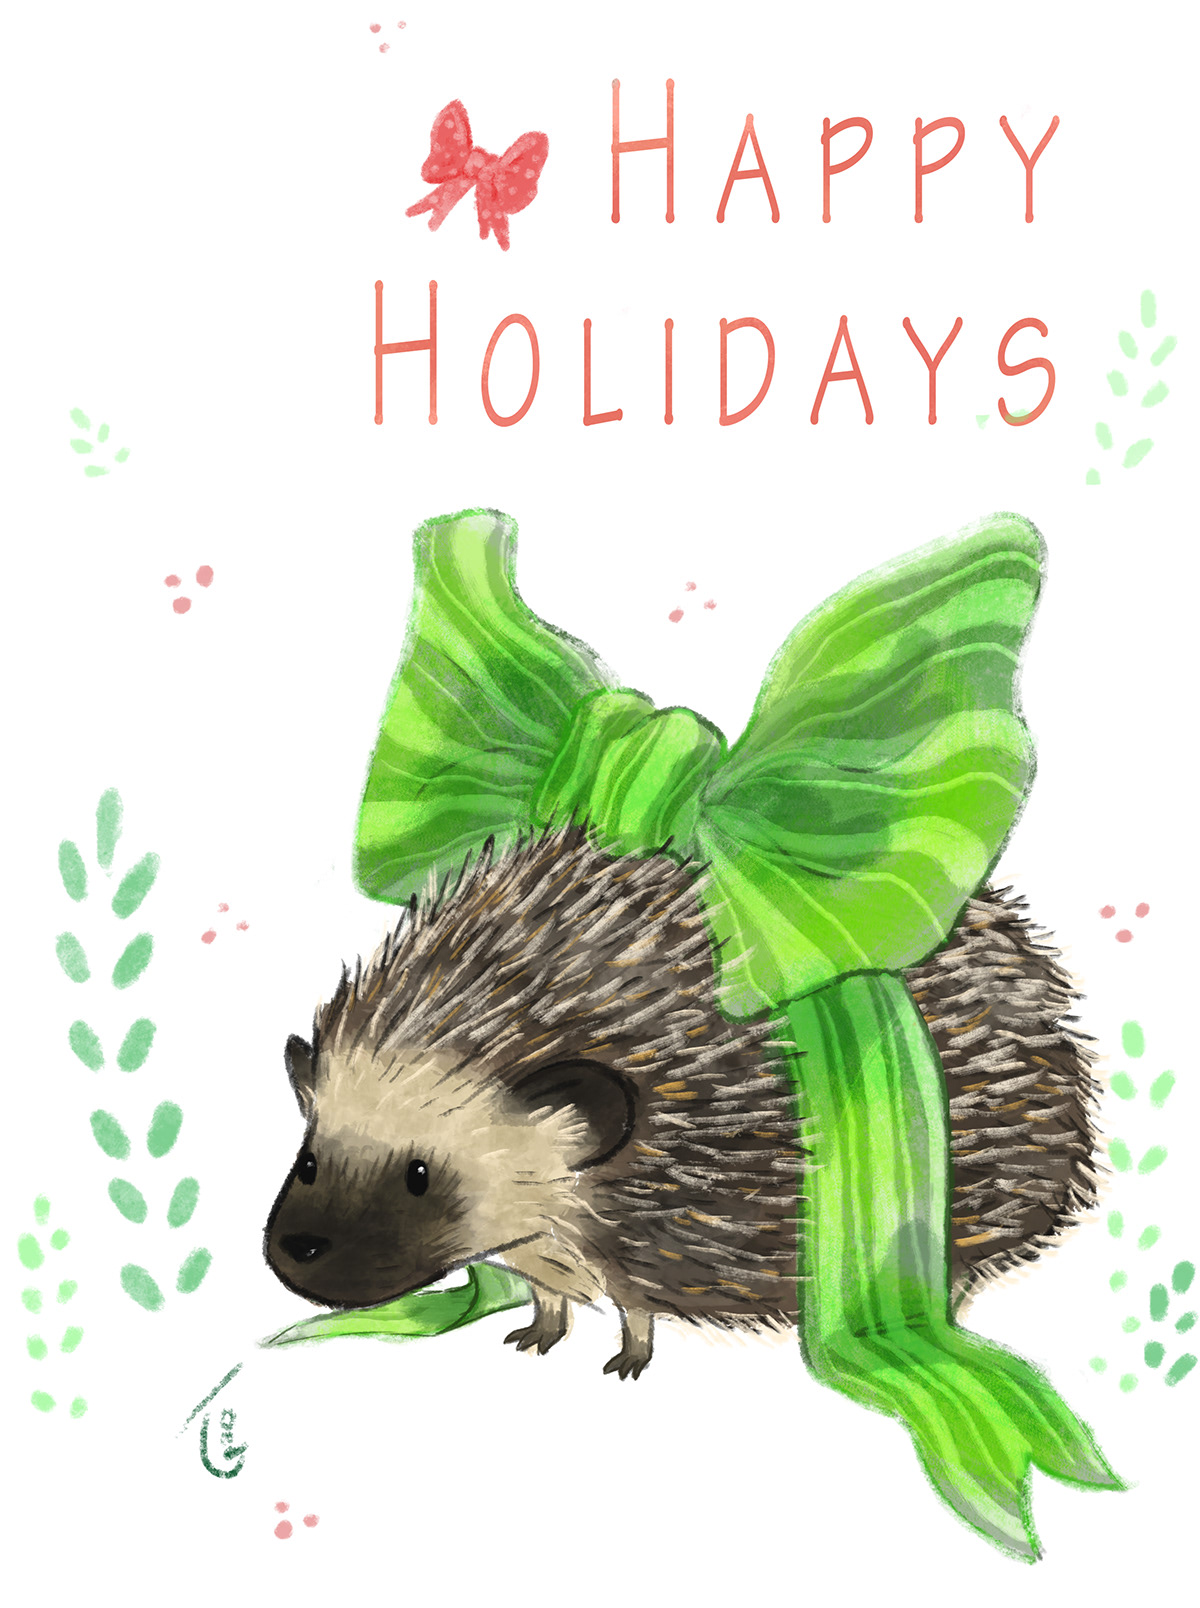 Hedgehog Christmas postcard holidays laces cute Little critters